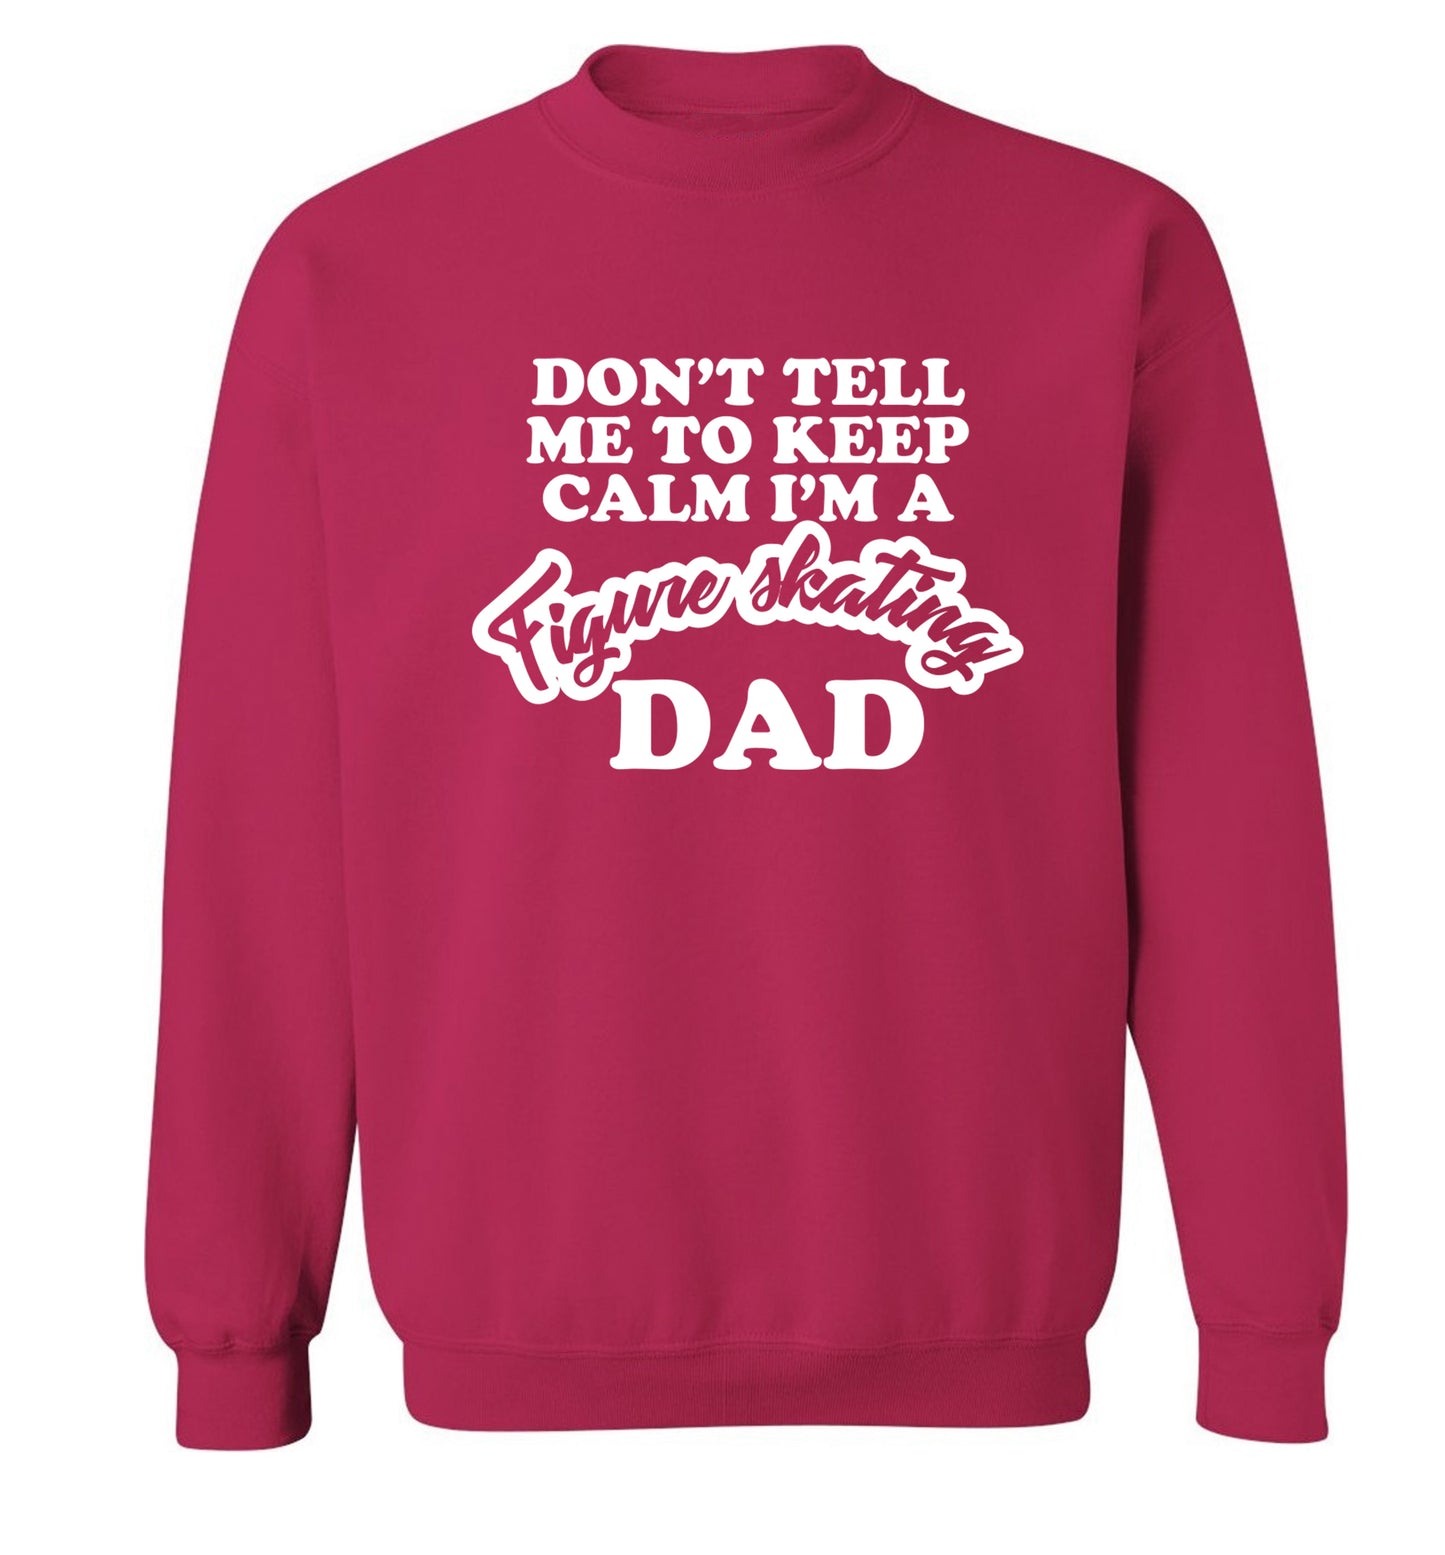 Don't tell me to keep calm I'm a figure skating dad Adult's unisexpink Sweater 2XL